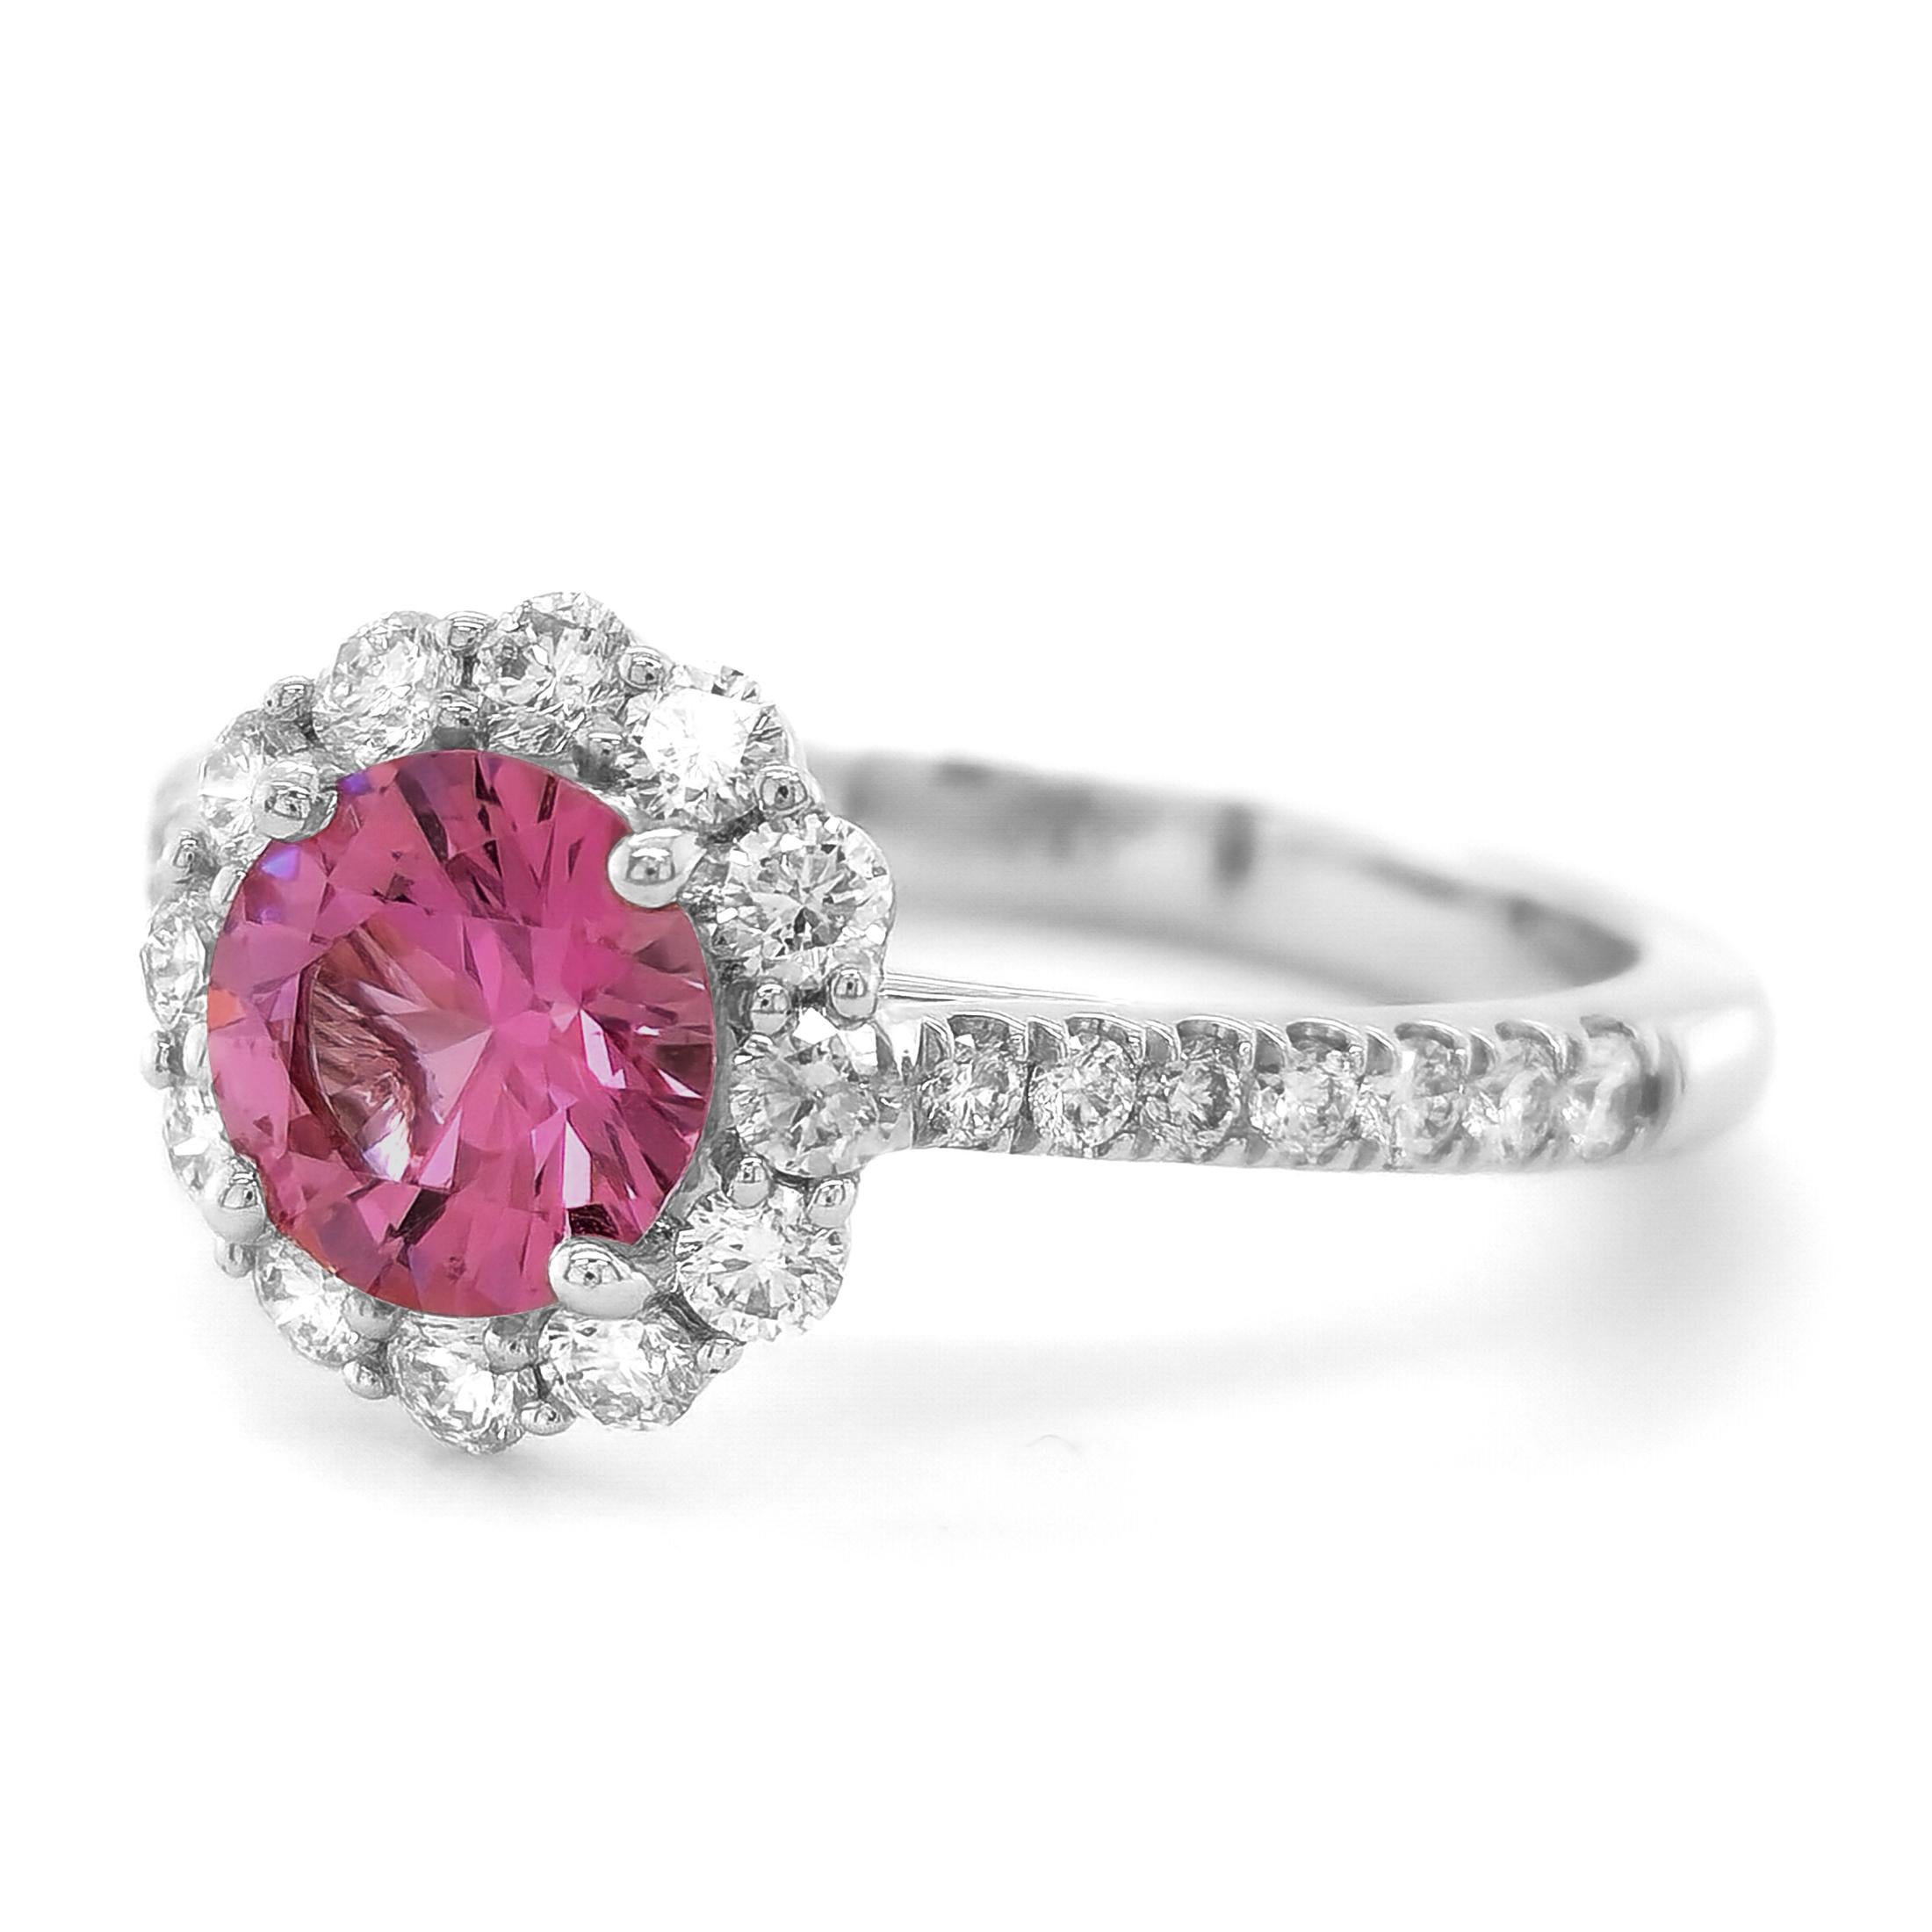 This exquisite Padparadscha Sapphire features a captivating orangy-pink hue reminiscent of a stunning sunset. Its soft and romantically warm tones make it a versatile choice, complementing various metal options. Ideal for rings, this gem allows you